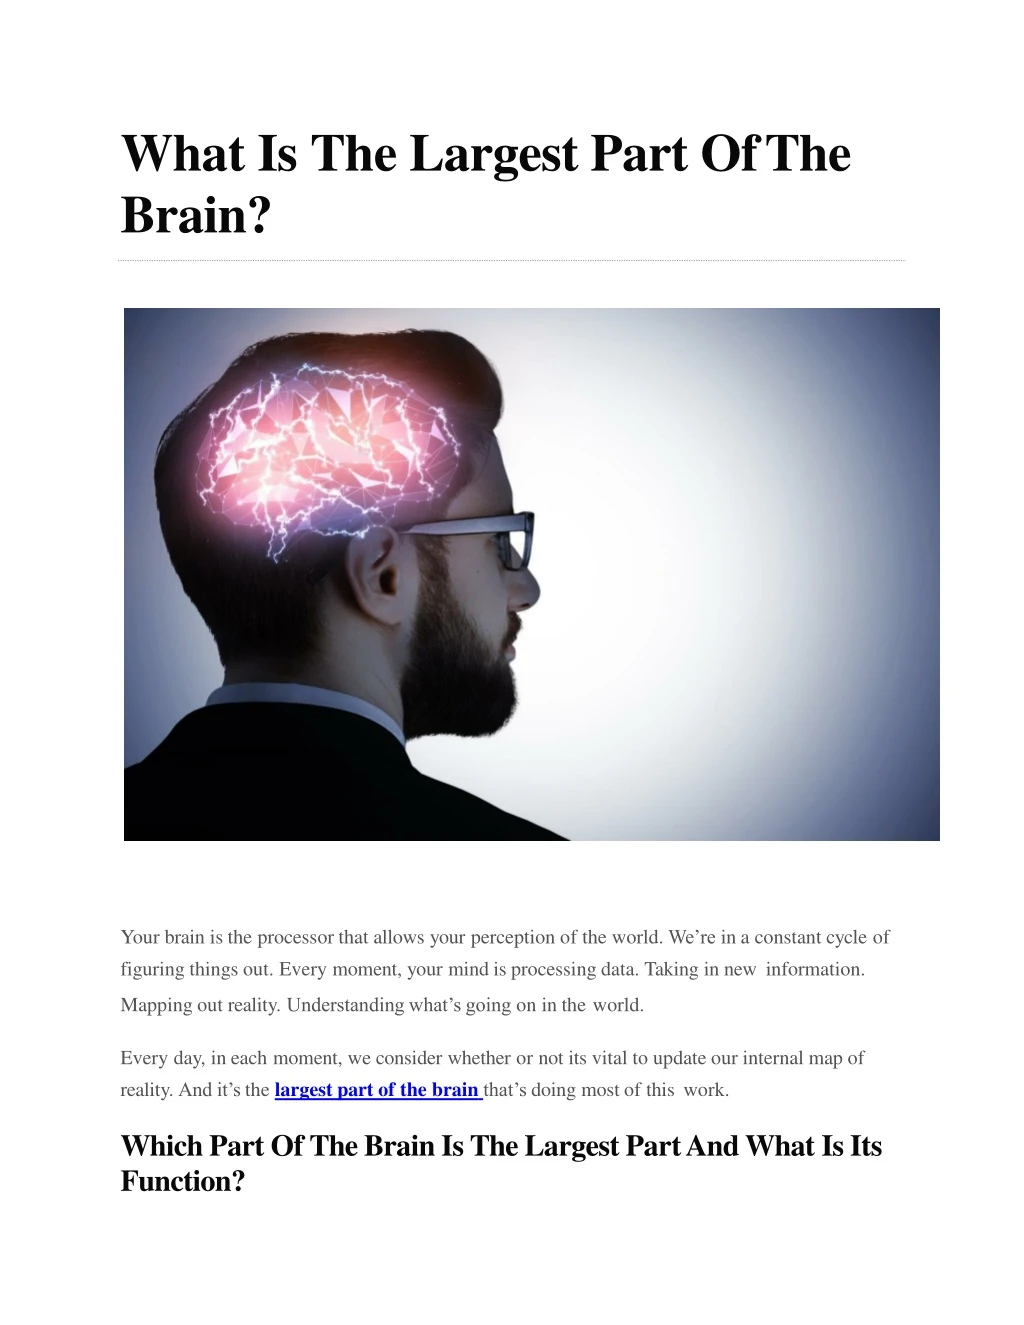 what is the largest part of the brain